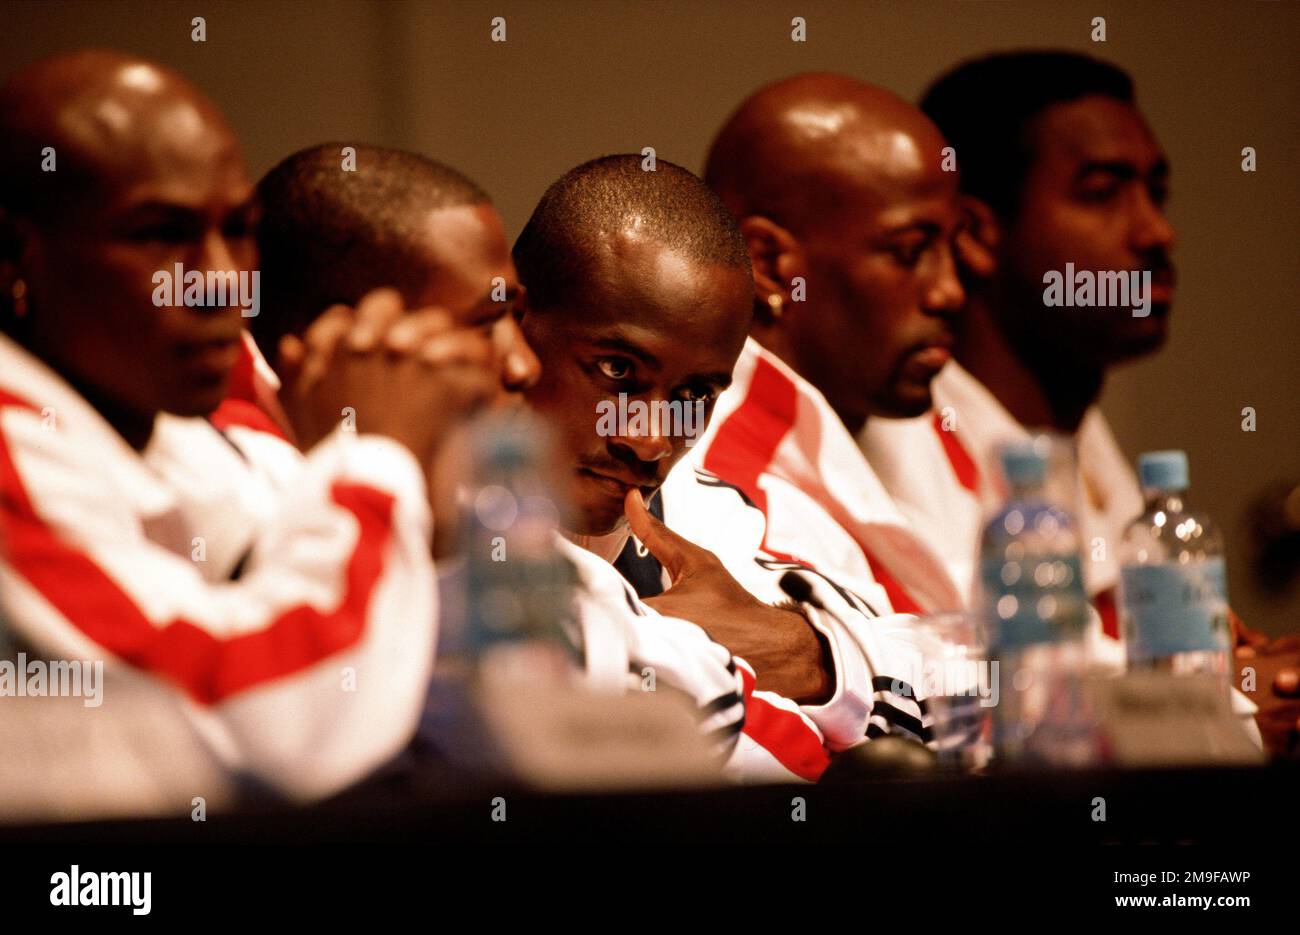 Orlanda Anderson, 27, third from the left, a US Army STAFF Sergeant stationed at Fort Carson, Colorado, sits amongst his teammates on the US Olympic Boxing Team during a press conference on September 13th, 2000 at the Sydney Olympic Park in Sydney, Australia. Anderson, a light heavyweight boxer, is the first Army boxer to make the Olympic Team since 1988. Base: Sydney Olympic Park State: New South Wales Country: Australia (AUS) Stock Photo